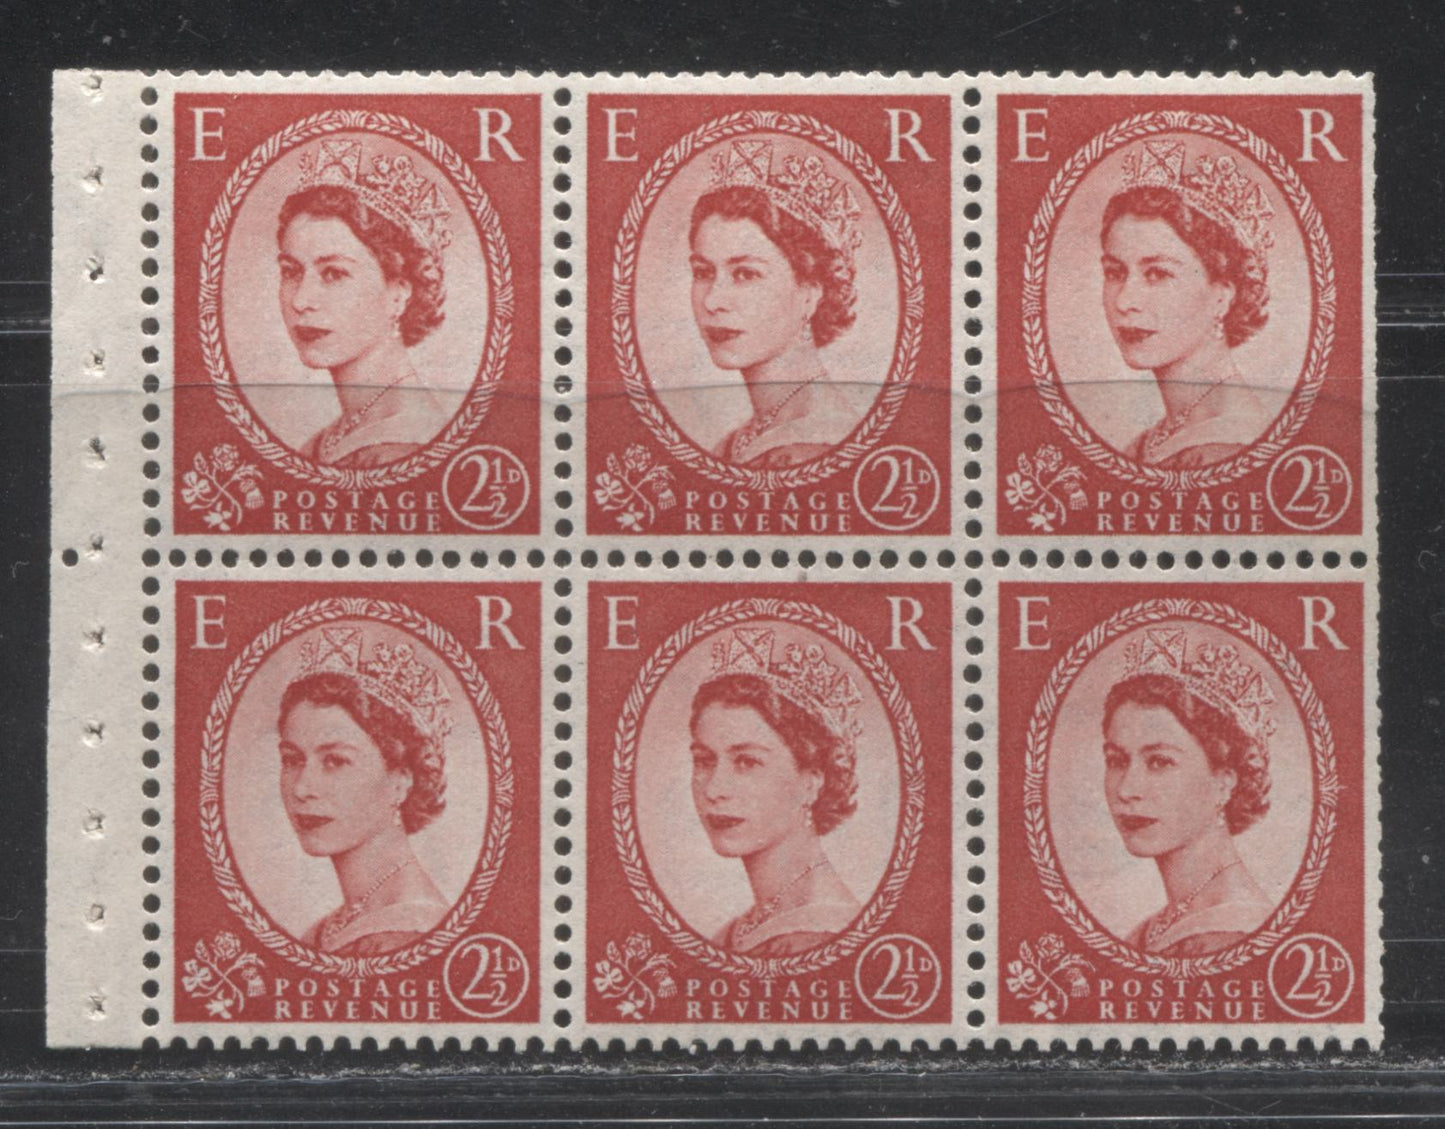 Great Britain SG#F53 2/6d Dull Green & Black Cover 1956-1959 Wilding Issue, A Complete Booklet With Upright St. Edward's Crown, Panes of 6, Type B GPO Cypher, April 1957